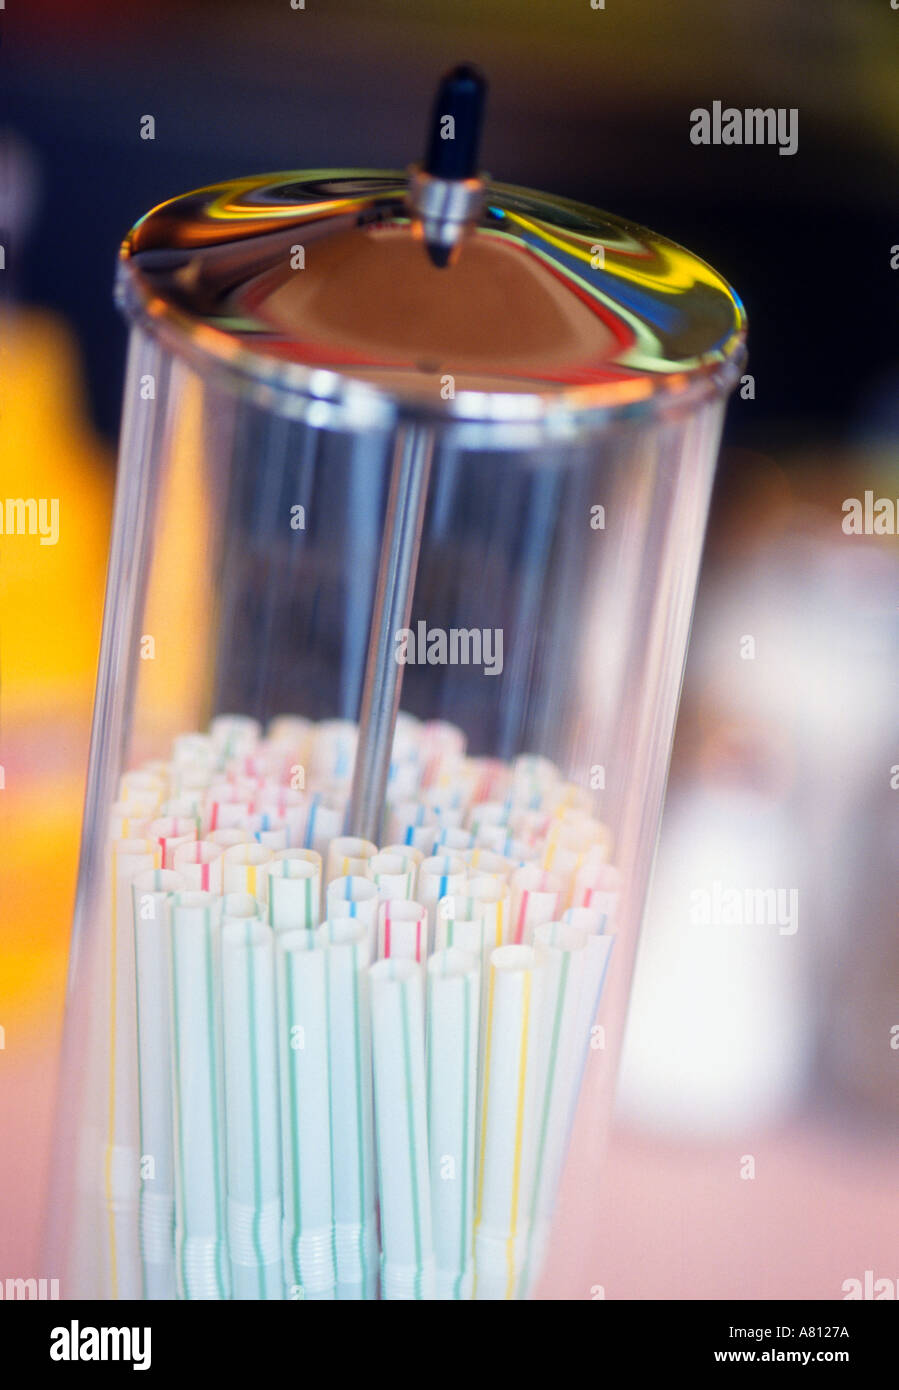 https://c8.alamy.com/comp/A8127A/straw-dispenser-on-counter-of-american-style-diner-A8127A.jpg